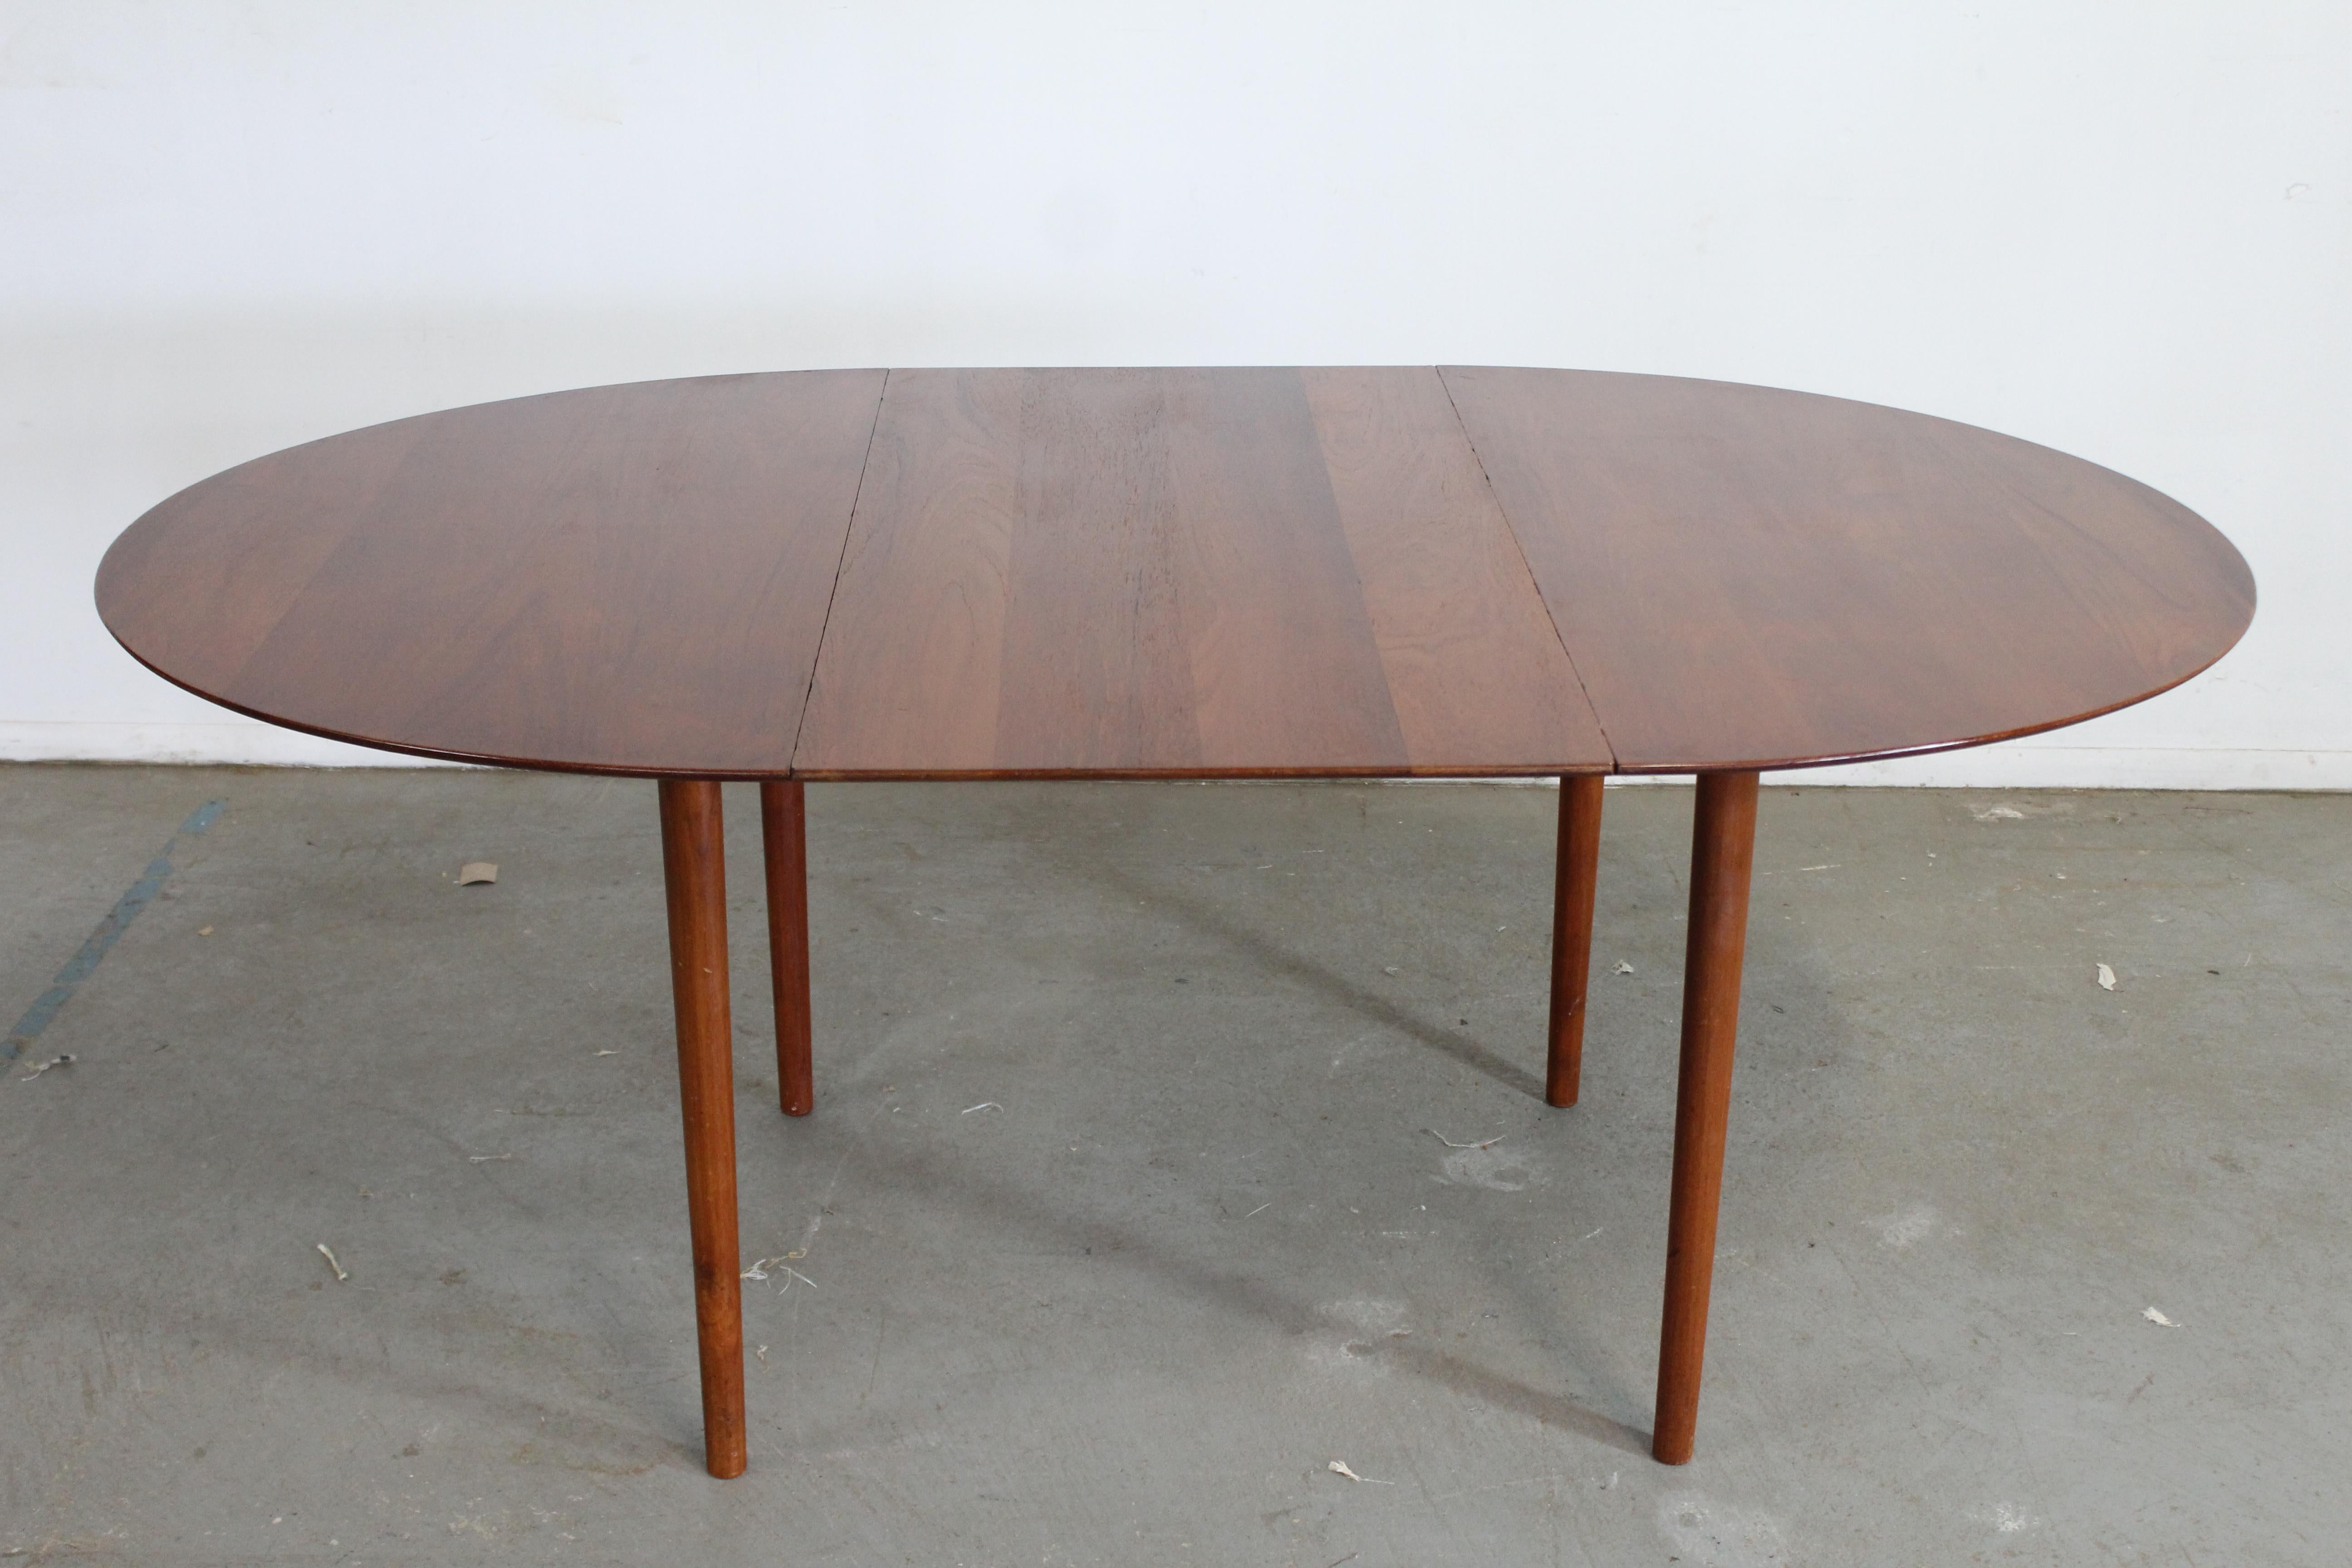 Mid-Century Danish Modern Peter Hdvit teak oval dining table w 1 Extension

Offered is a vintage mid-century modern dining table. The table was designed by Peter Hdvit for Sorborg. Referred to as model 311. The table is made of teak and features 1